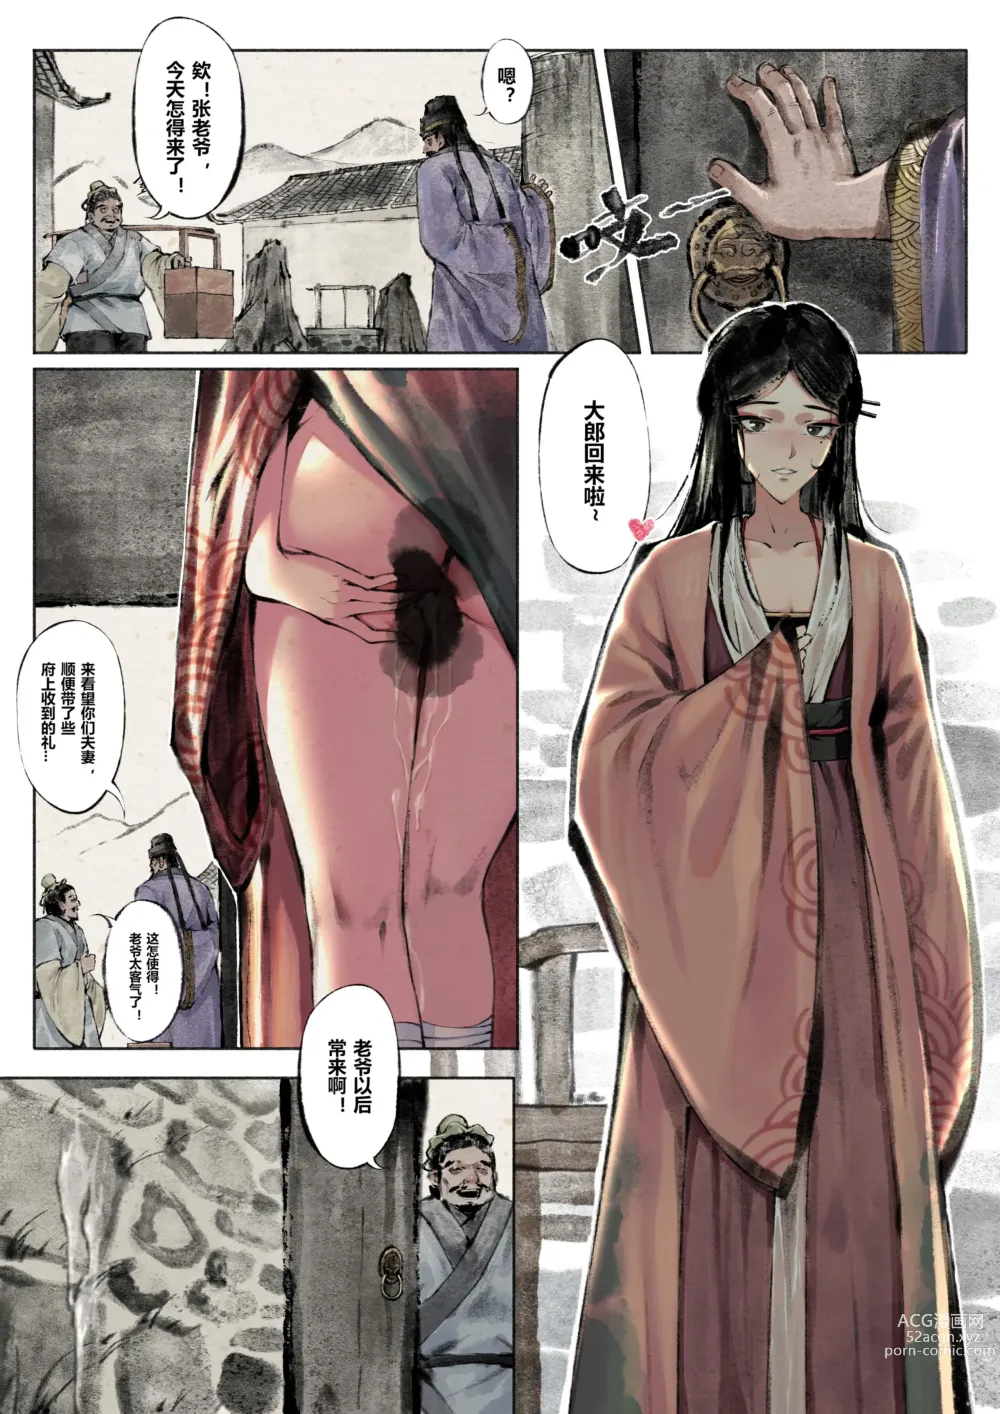 Page 5 of doujinshi Plum in the Golden Vase